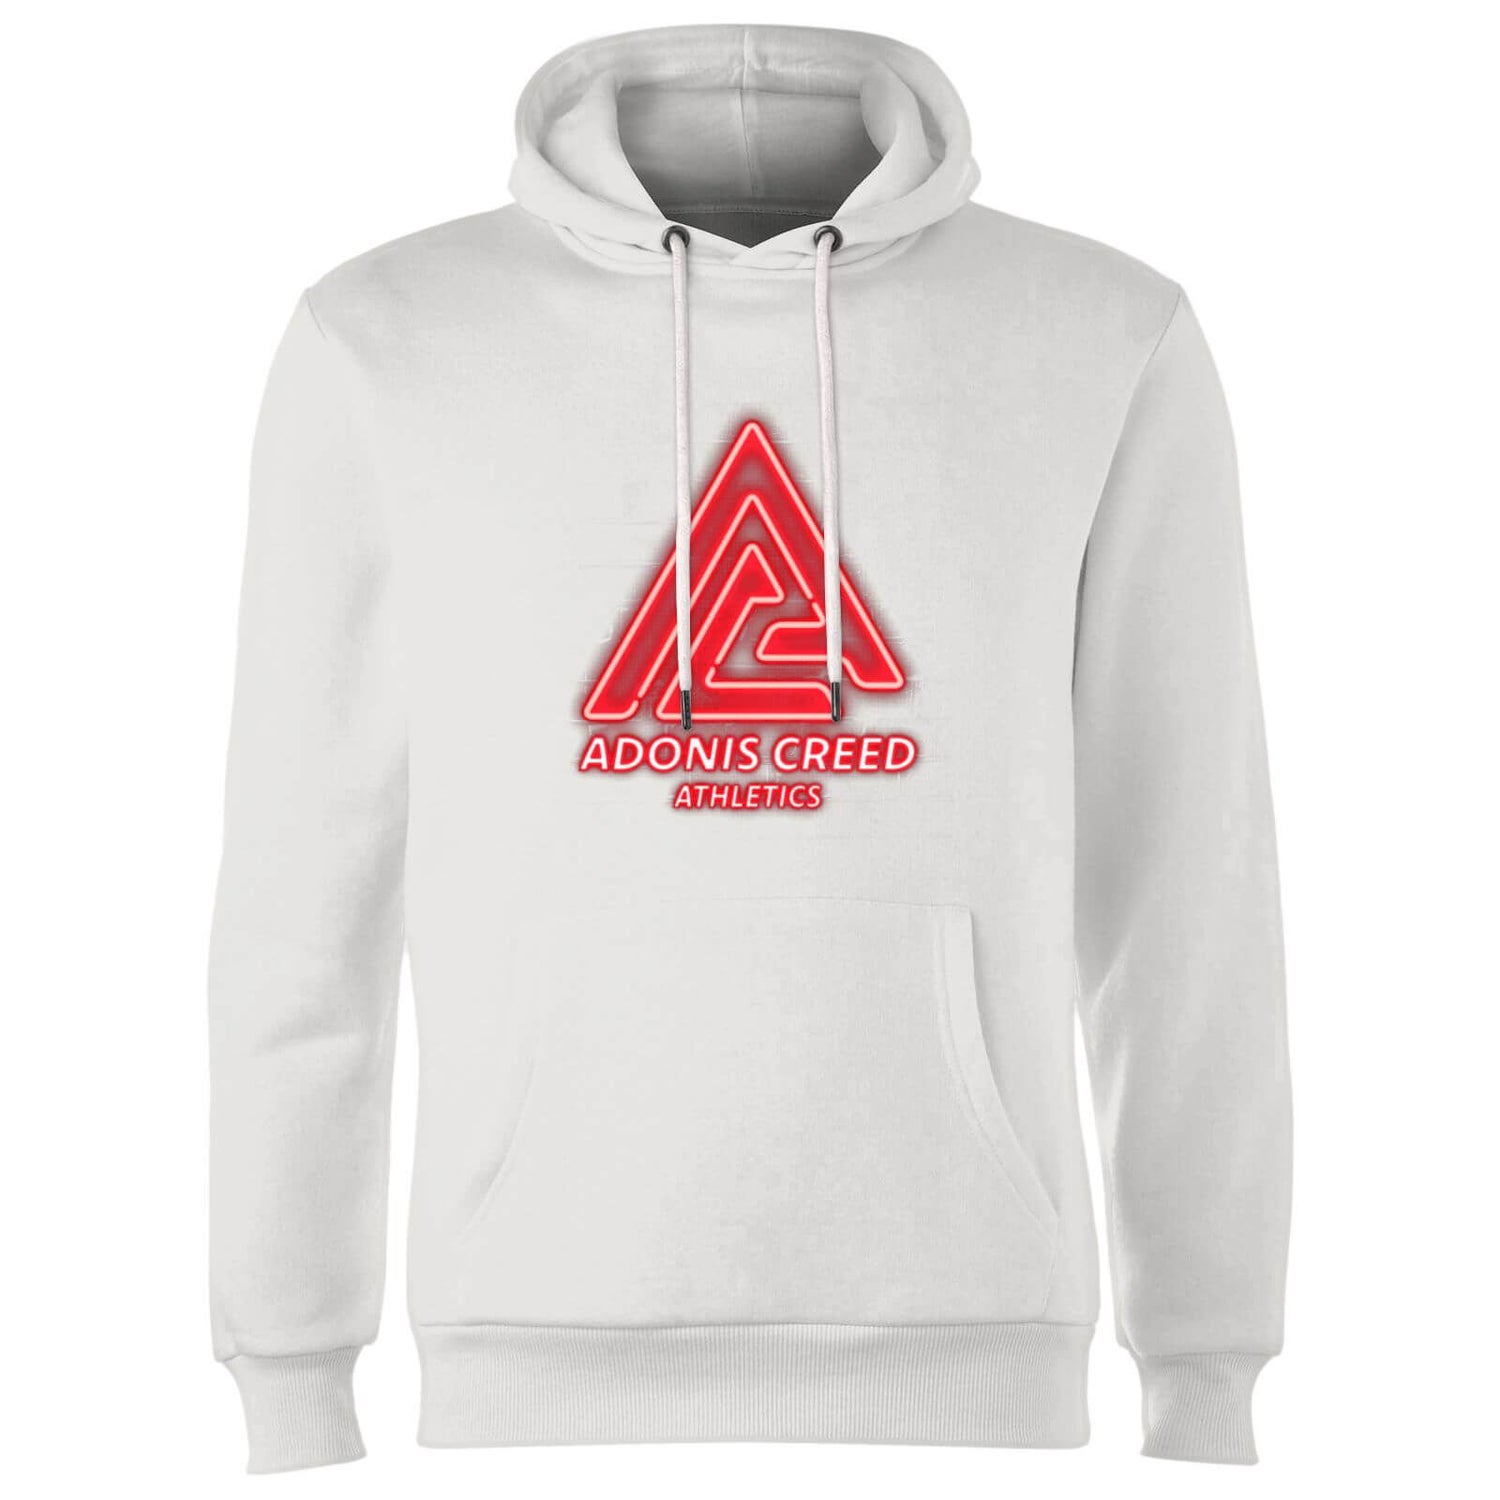 Creed Adonis Creed Athletics Neon Sign Hoodie - White